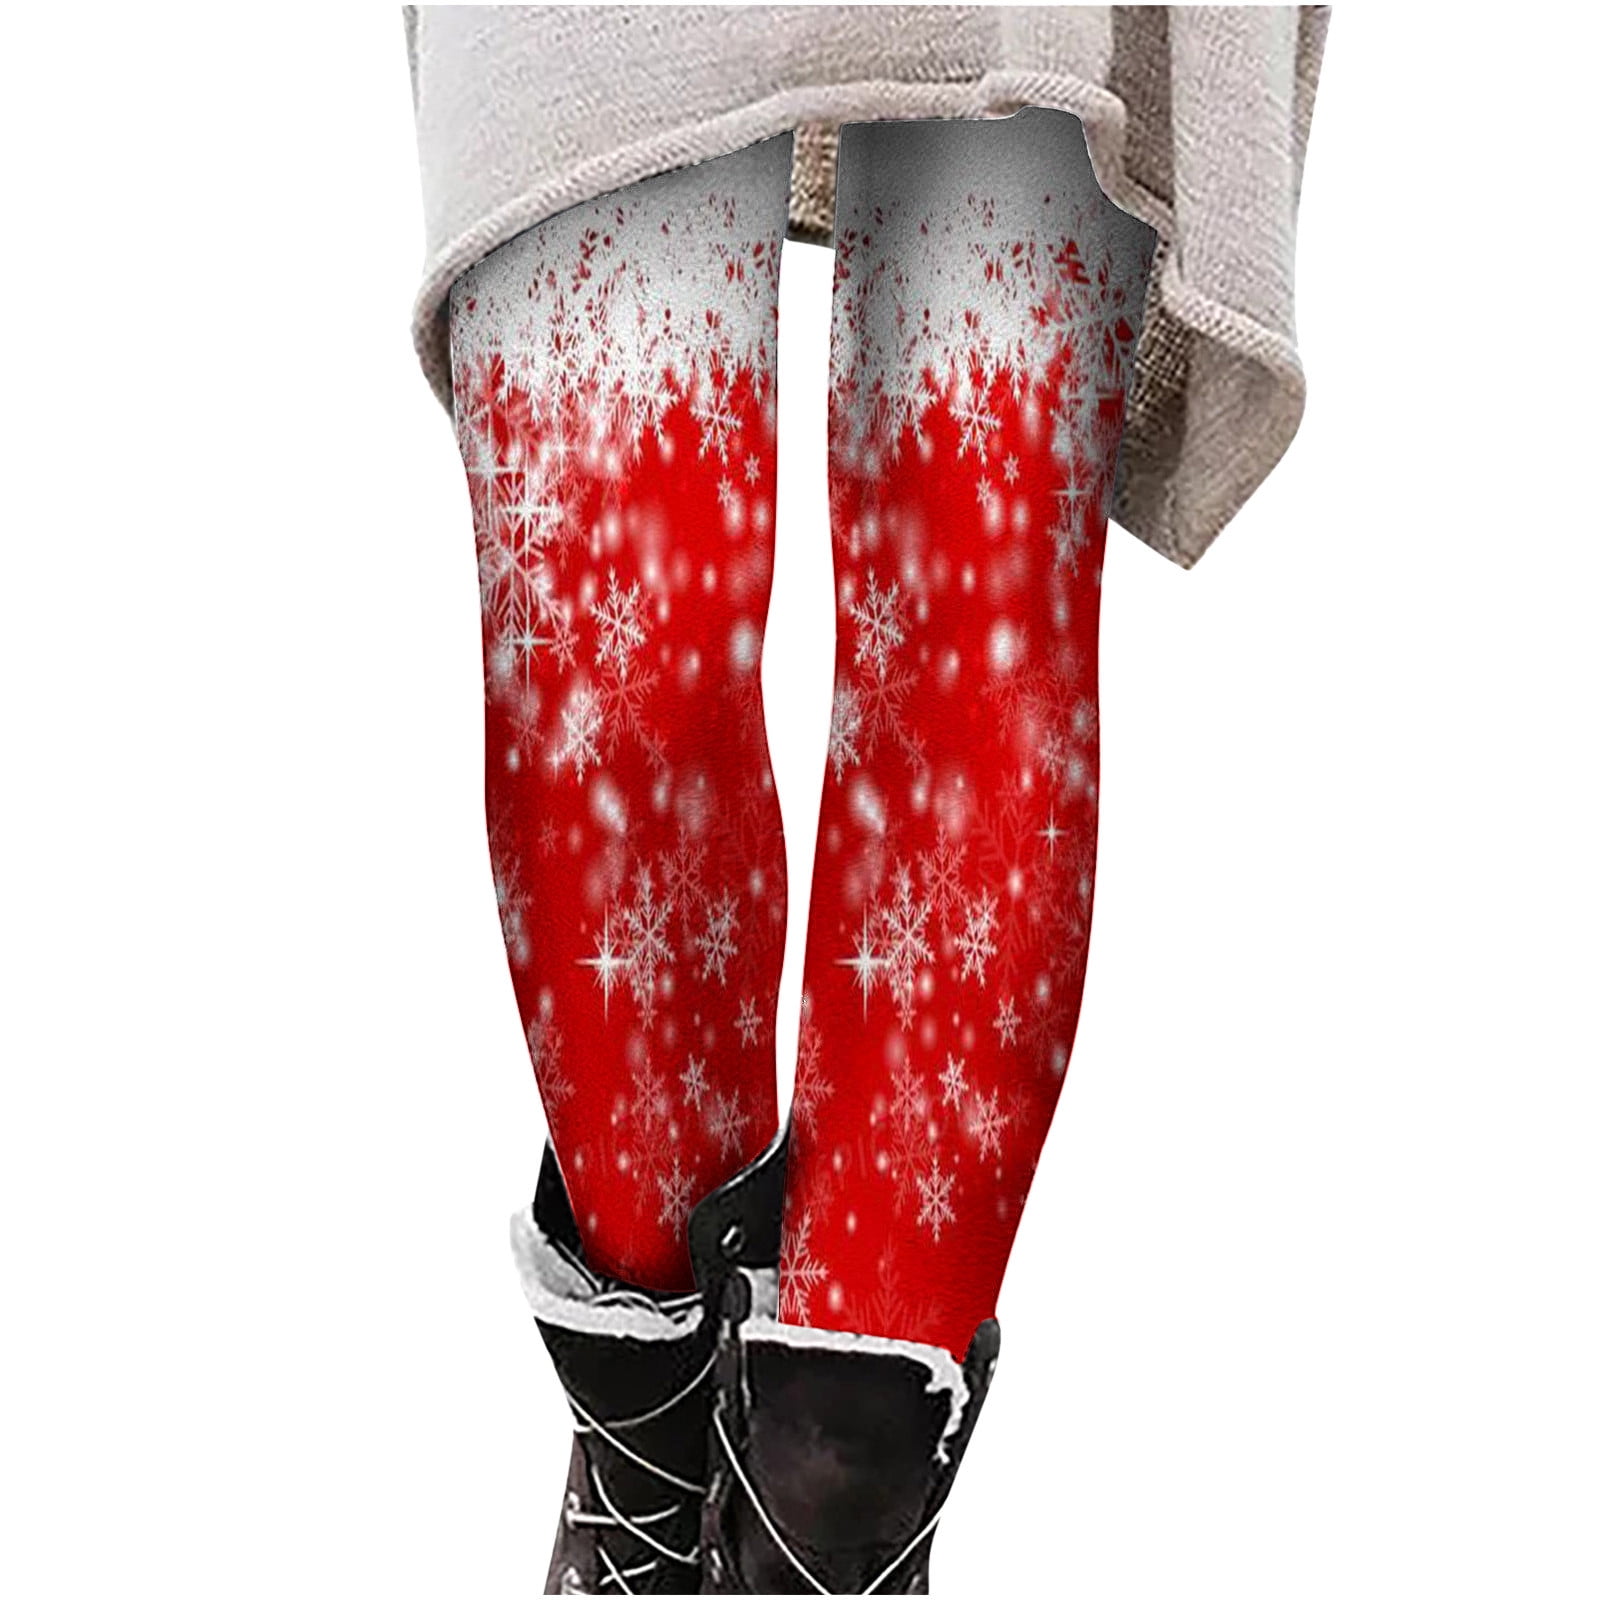 YYDGH Christmas Leggings for Women Plus Size High Waist Workout Pants Tummy  Control Santa Claus Print Holiday Legging Tights L